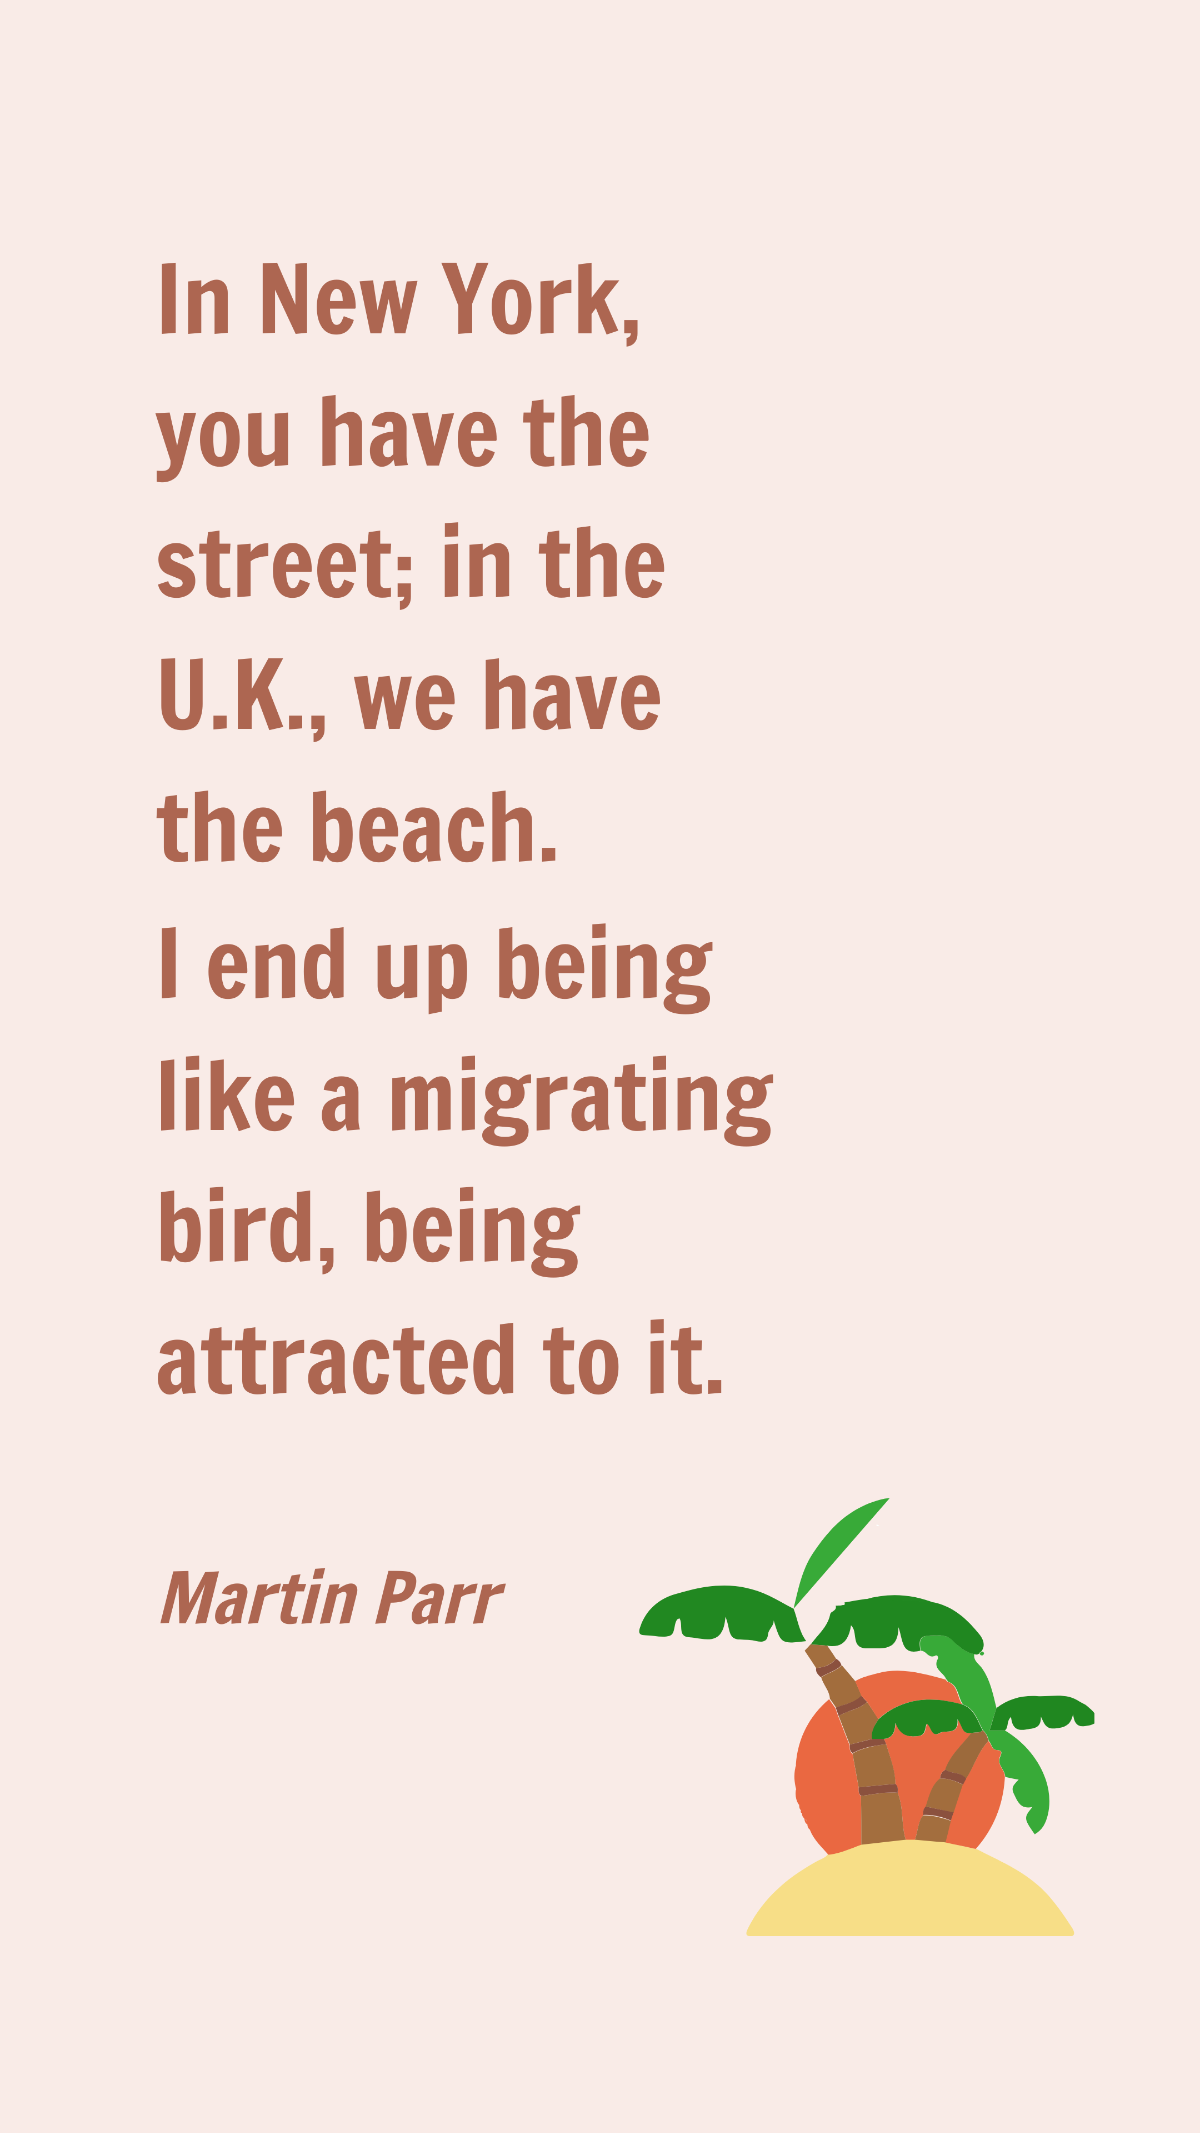 Free Martin Parr - In New York, you have the street; in the U.K., we have the beach. I end up being like a migrating bird, being attracted to it. Template